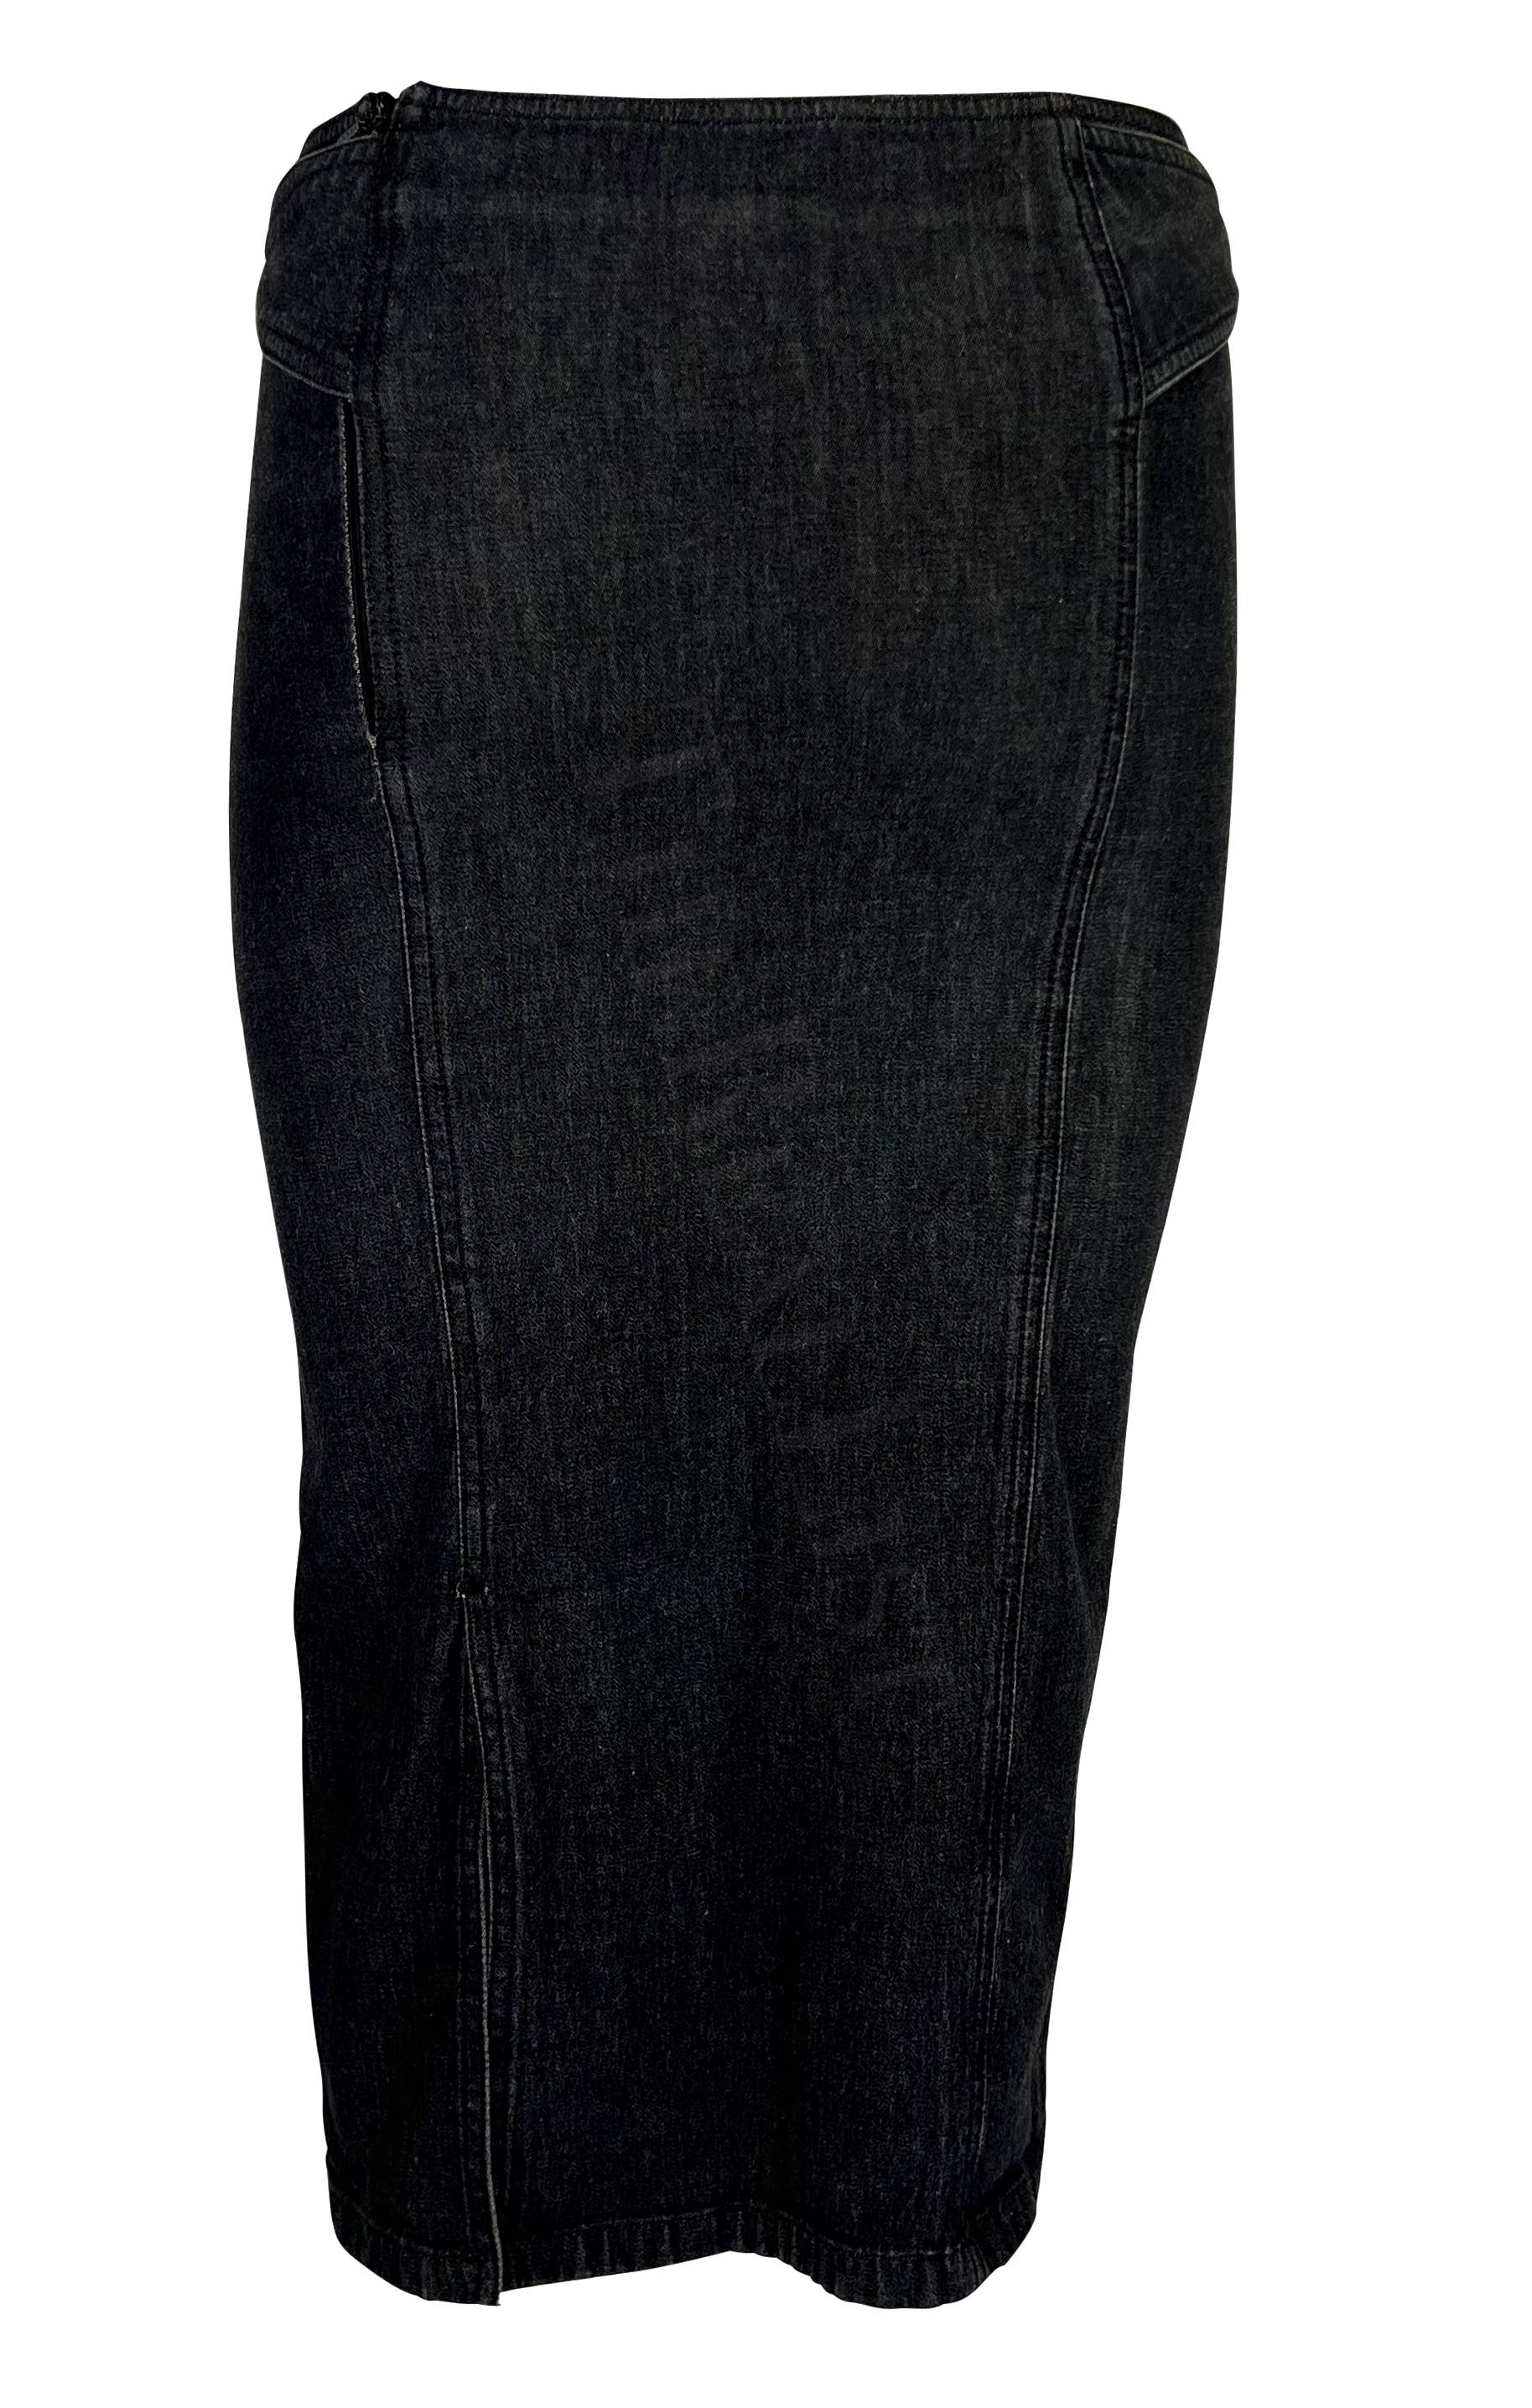 2001 Gucci by Tom Ford Dark Wash Denim Skirt with Metal Buckle For Sale 1